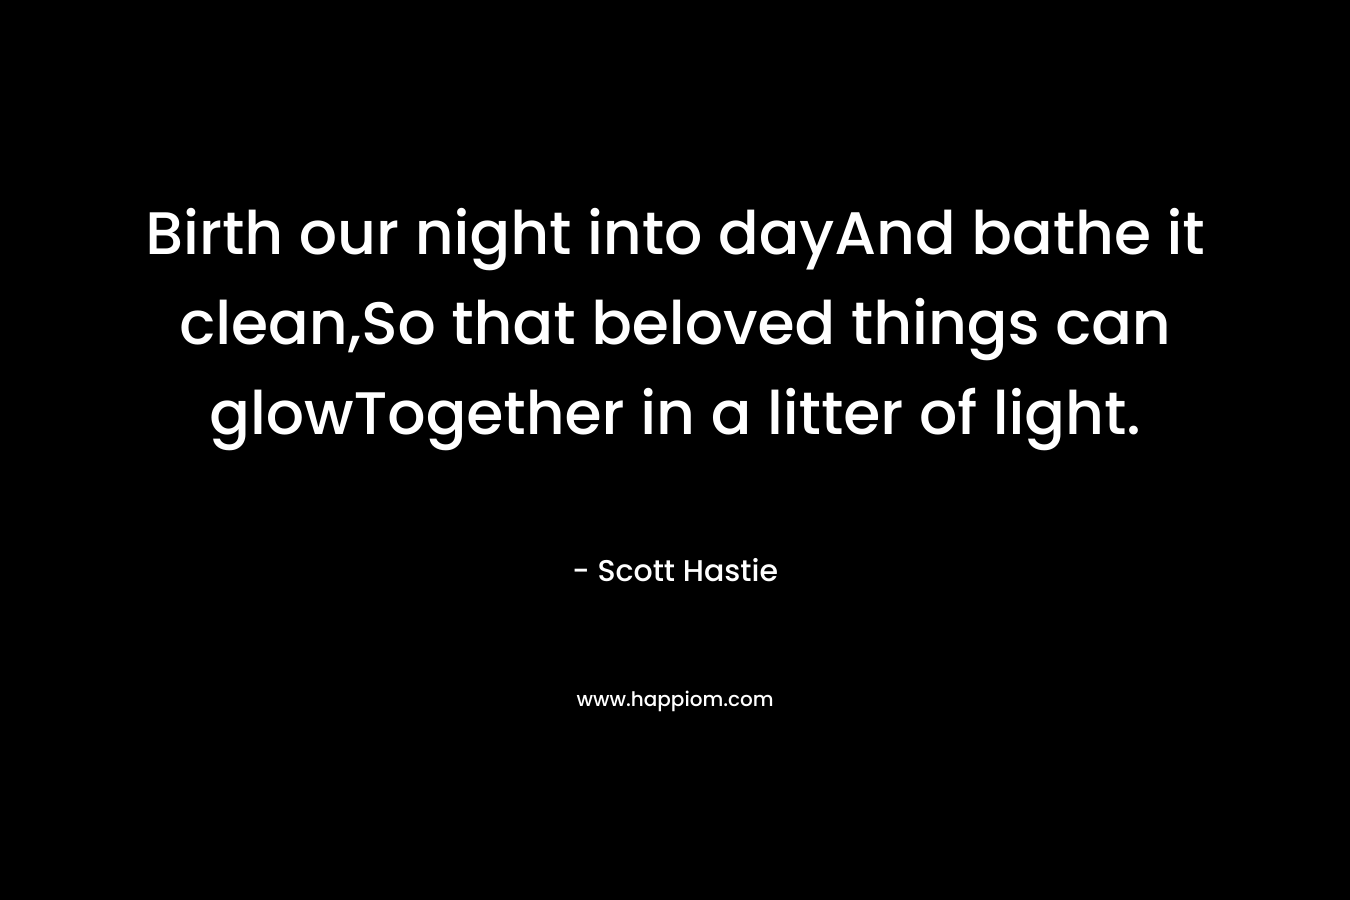 Birth our night into dayAnd bathe it clean,So that beloved things can glowTogether in a litter of light. – Scott Hastie